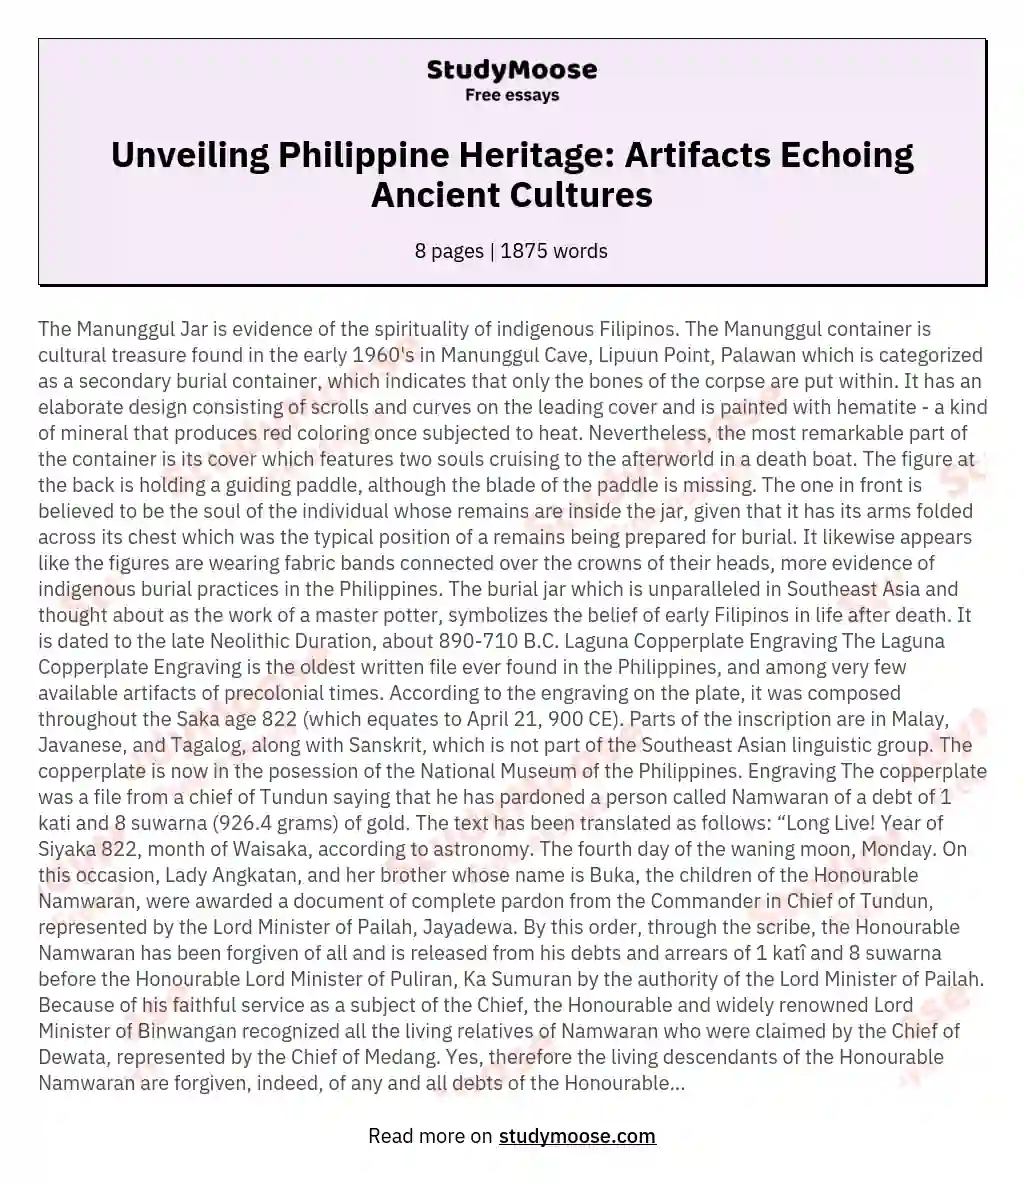 Unveiling Philippine Heritage: Artifacts Echoing Ancient Cultures essay